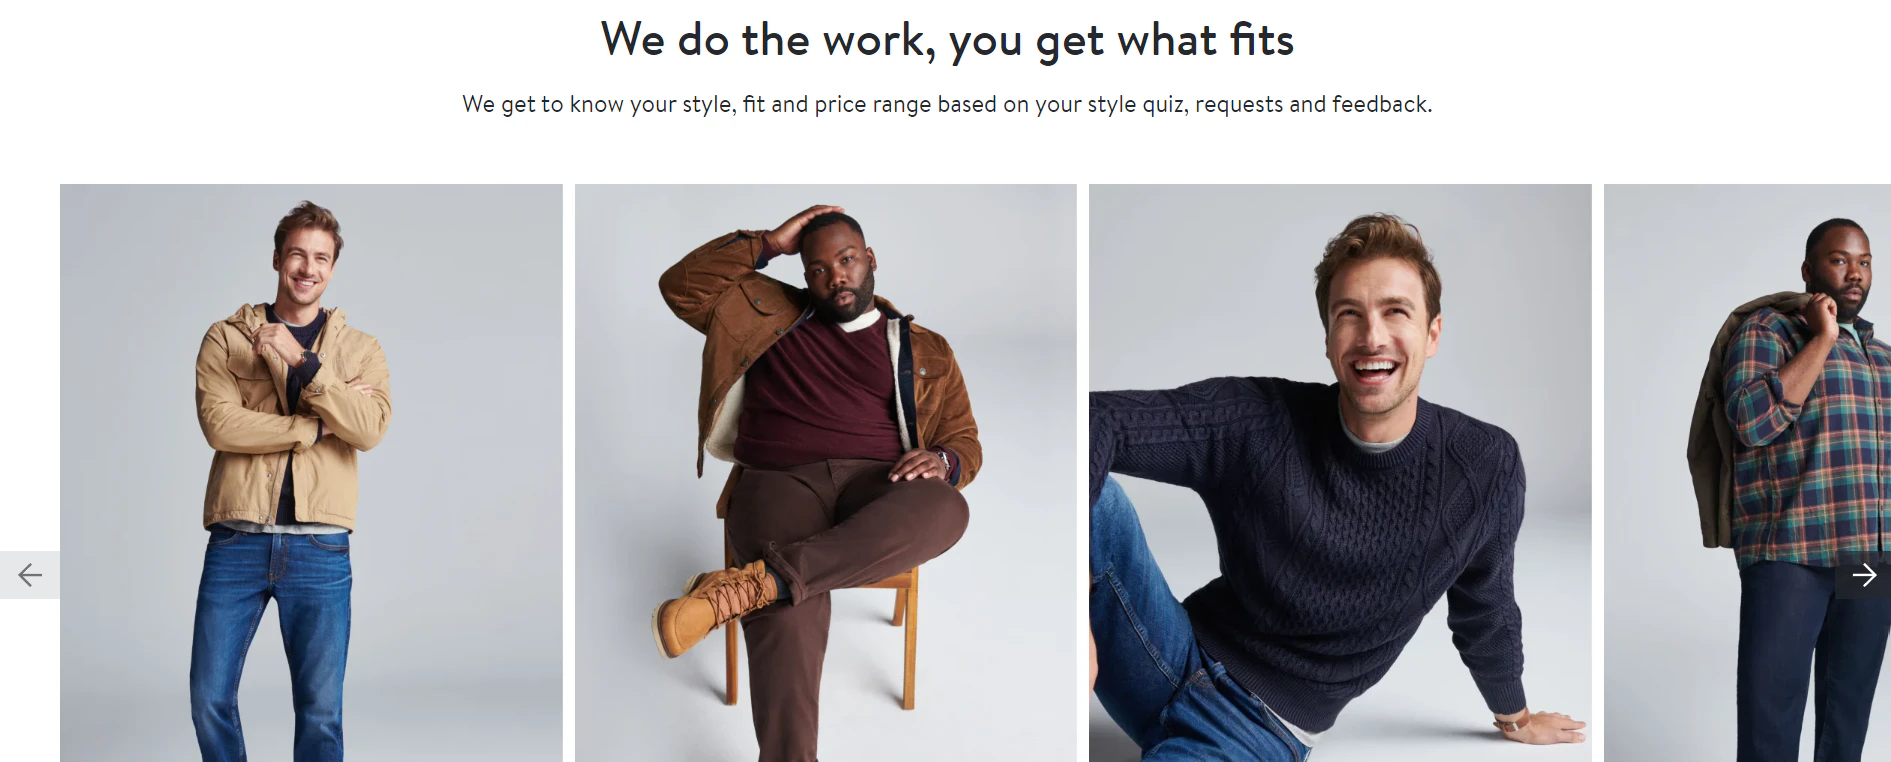 Stitch fix has a wide array of high quality product photographies